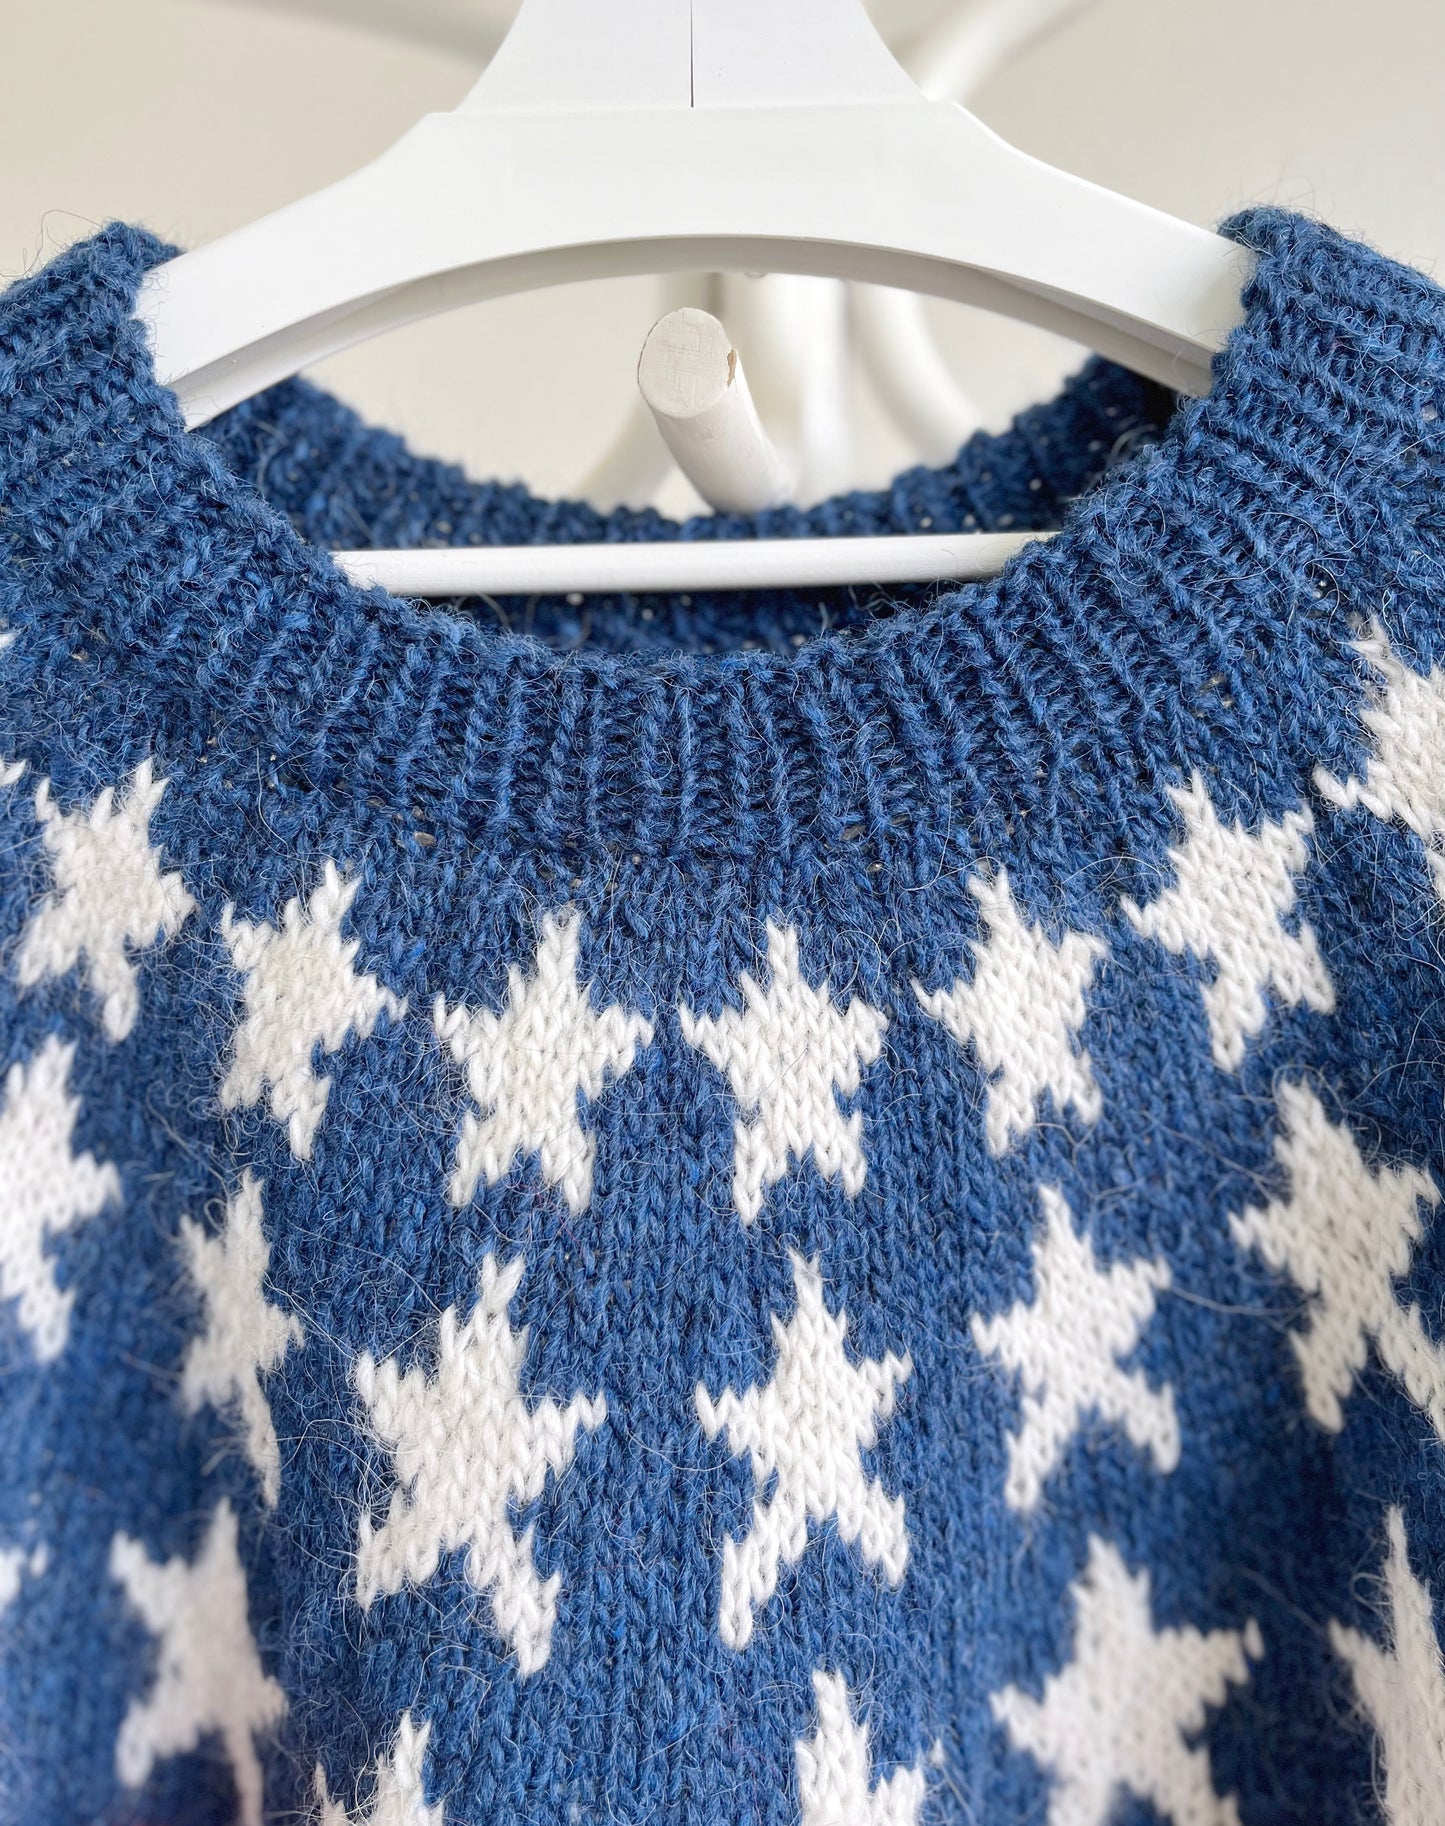 Details of Hand-knitted lopapeysa sweater in the USA FLAG design made with pure Icelandic wool